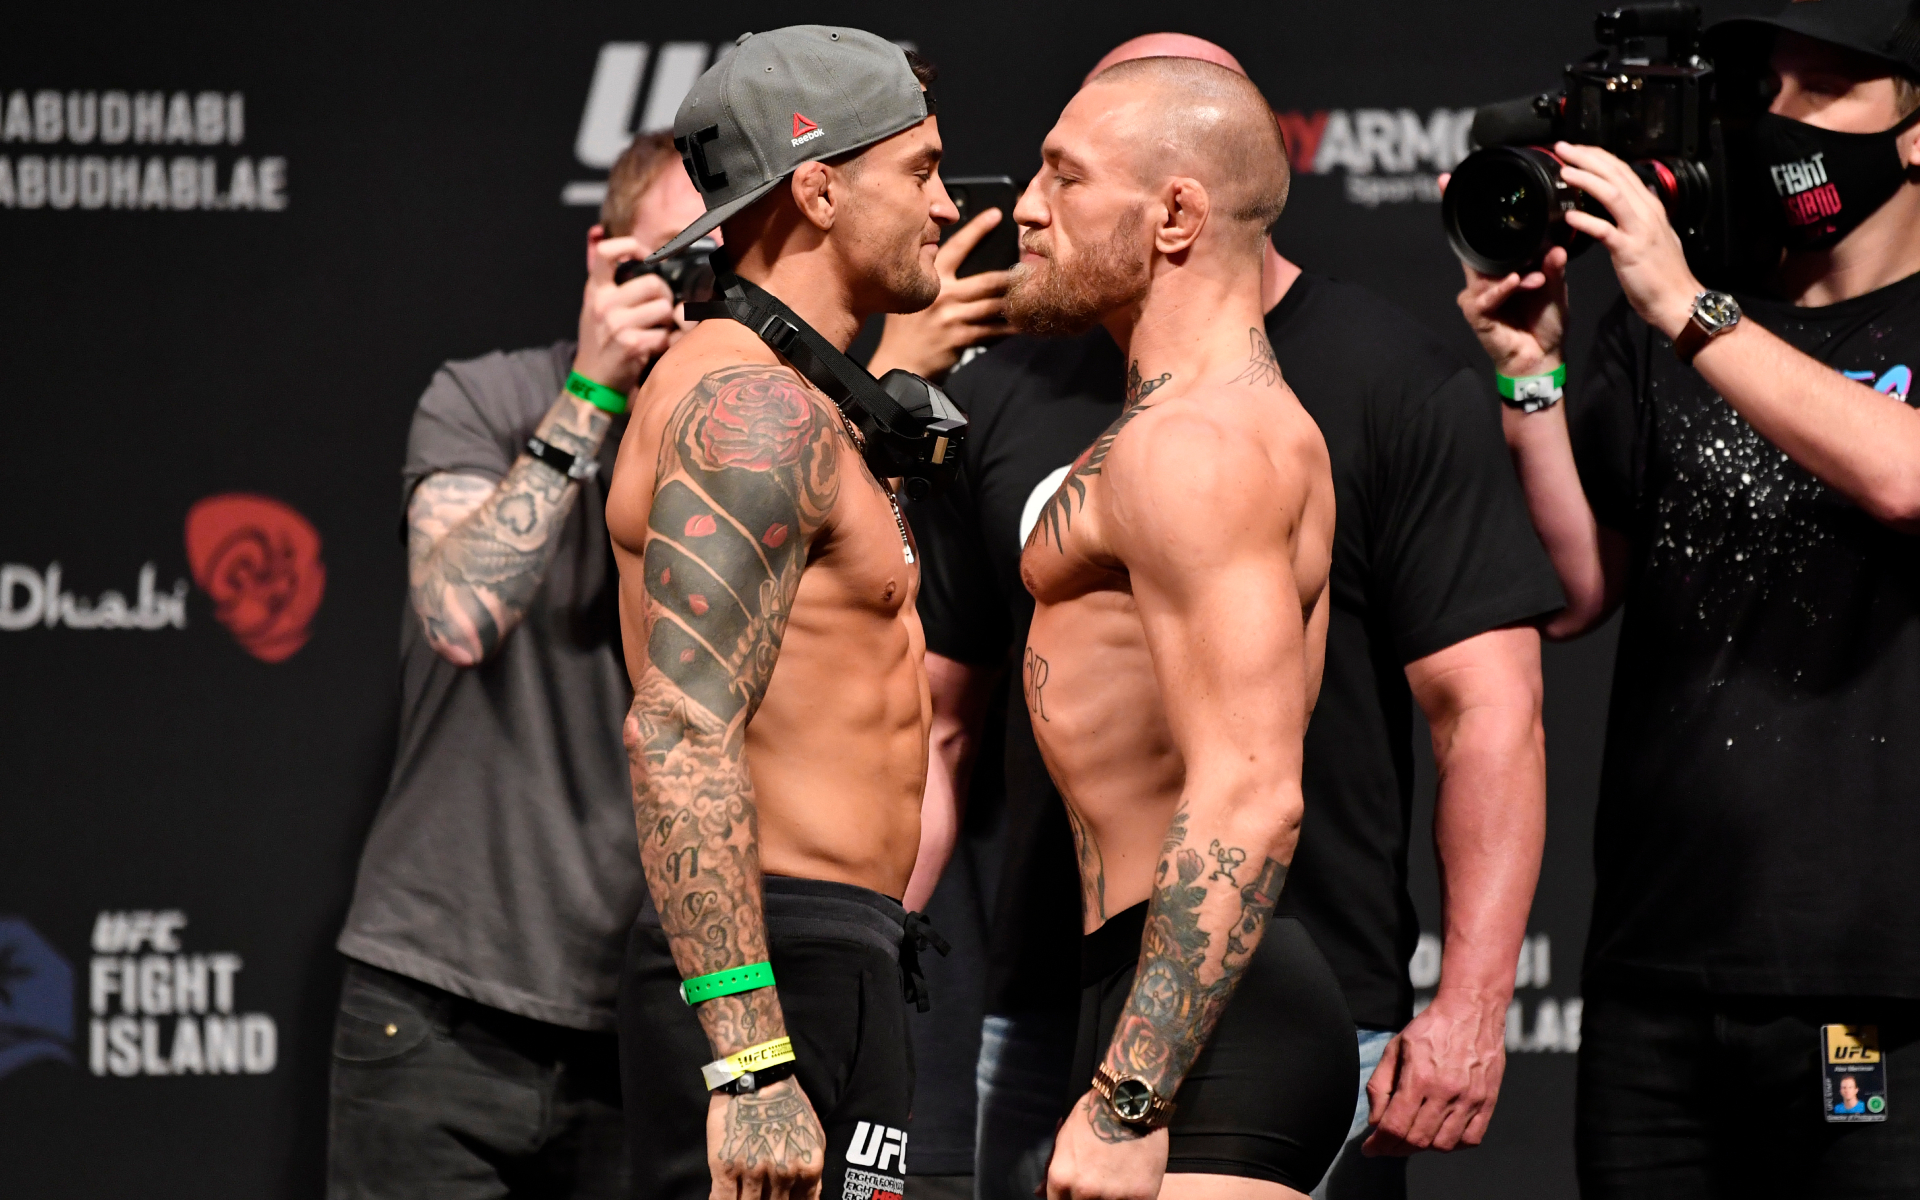 Dustin Poirier vs. Conor McGregor 3 will be the biggest pay-per-view of all time, says coach Mike Brown
